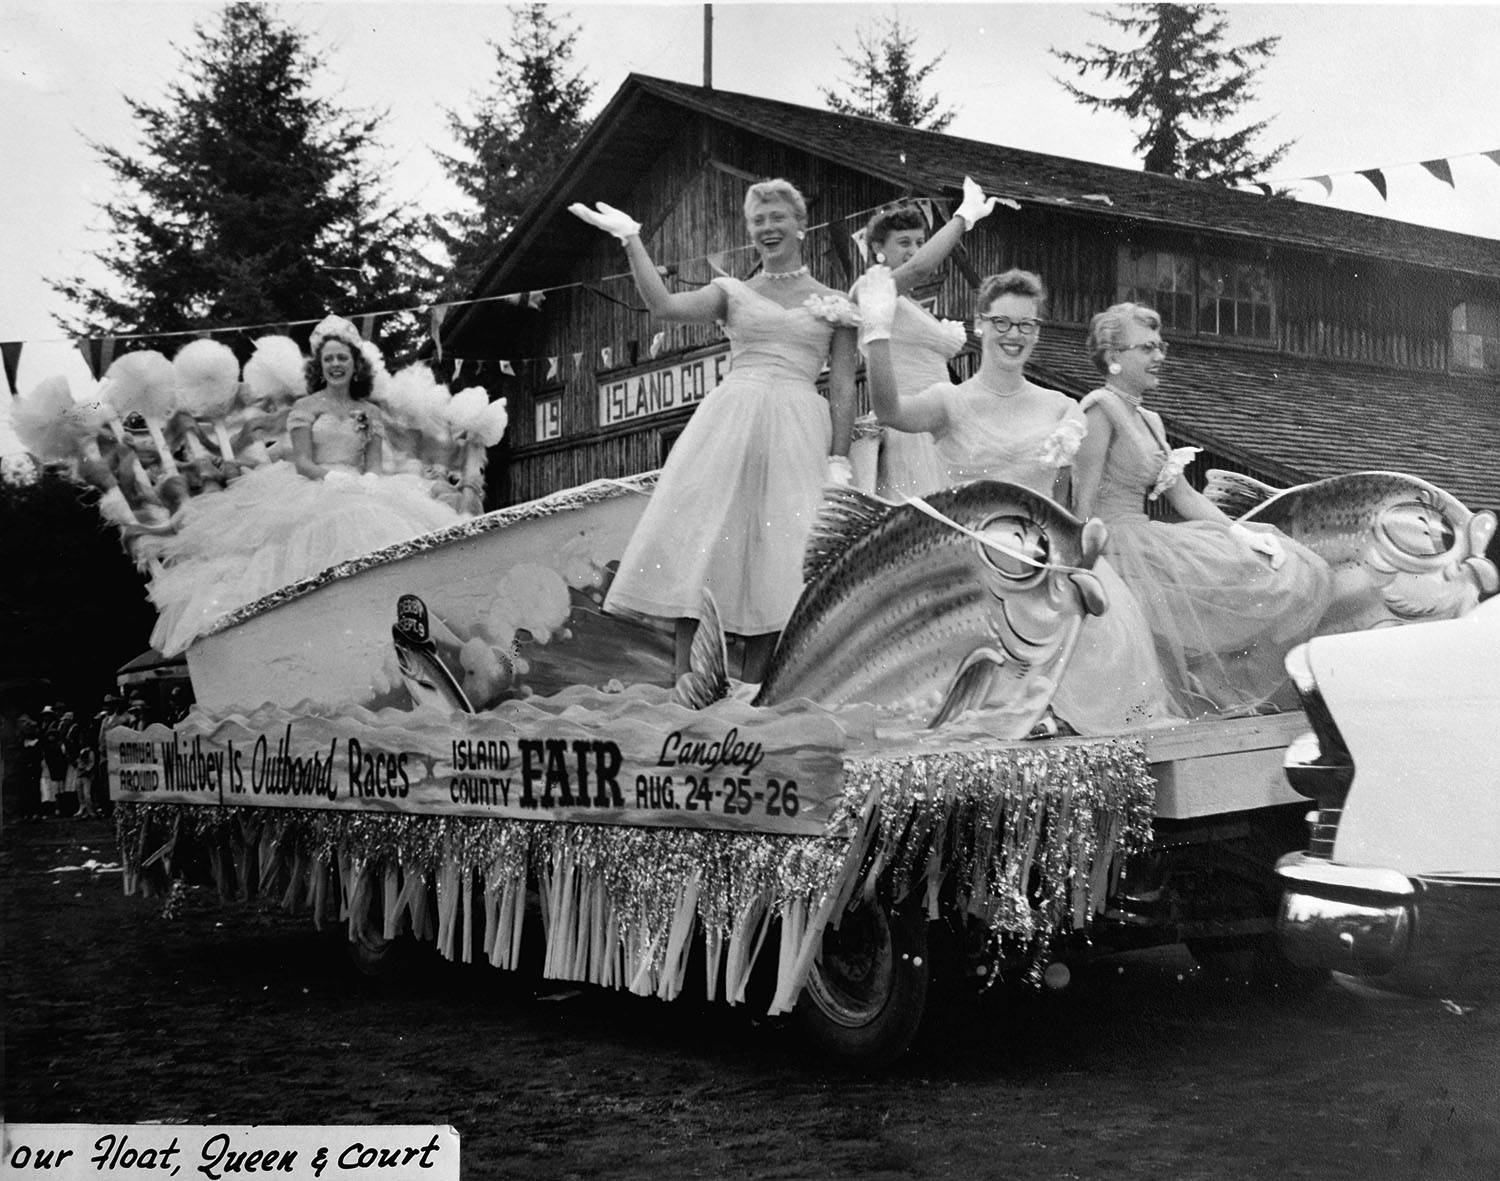 Queen Patsy Arthur and her court in the 1956 Fair Parade.